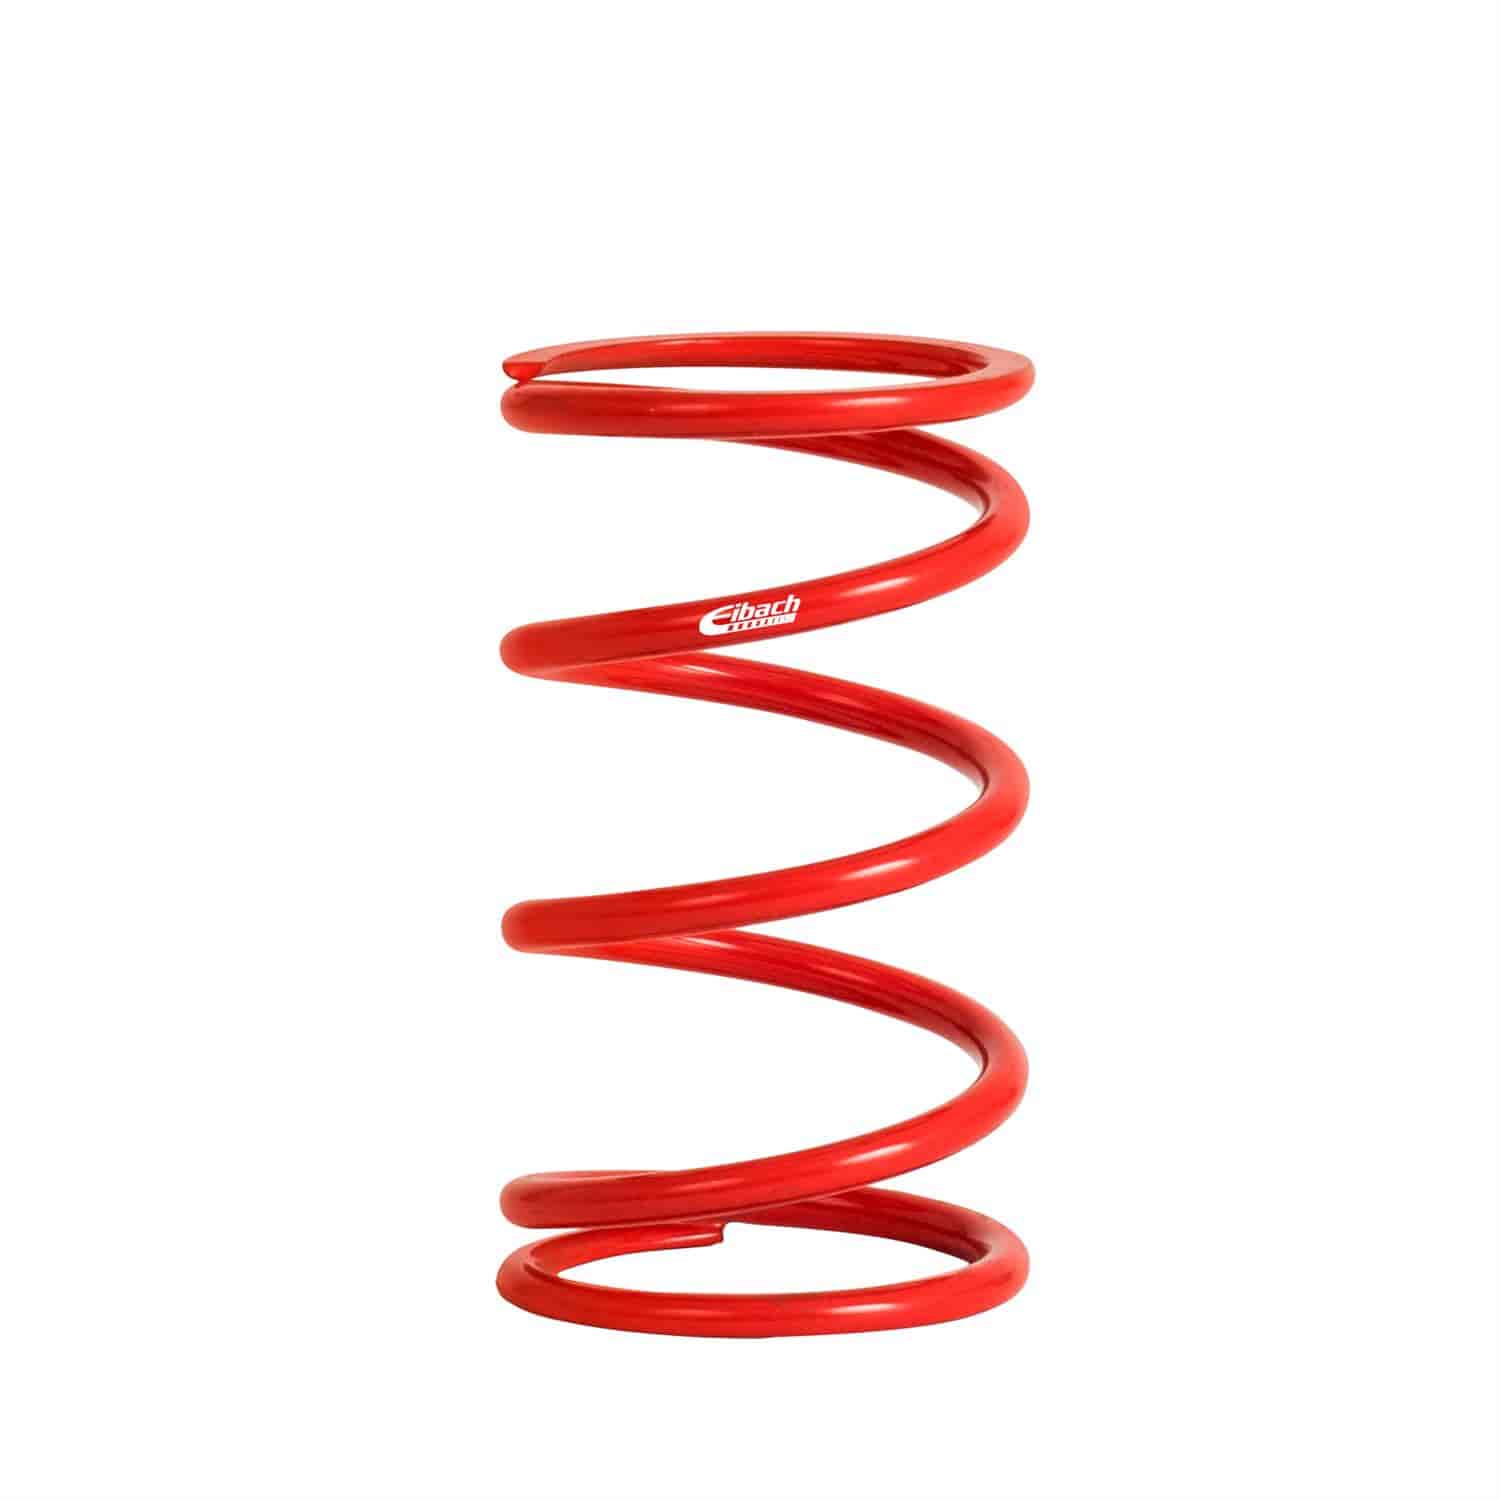 1050.550.0400 EIBACH CONVENTIONAL FRONT SPRING